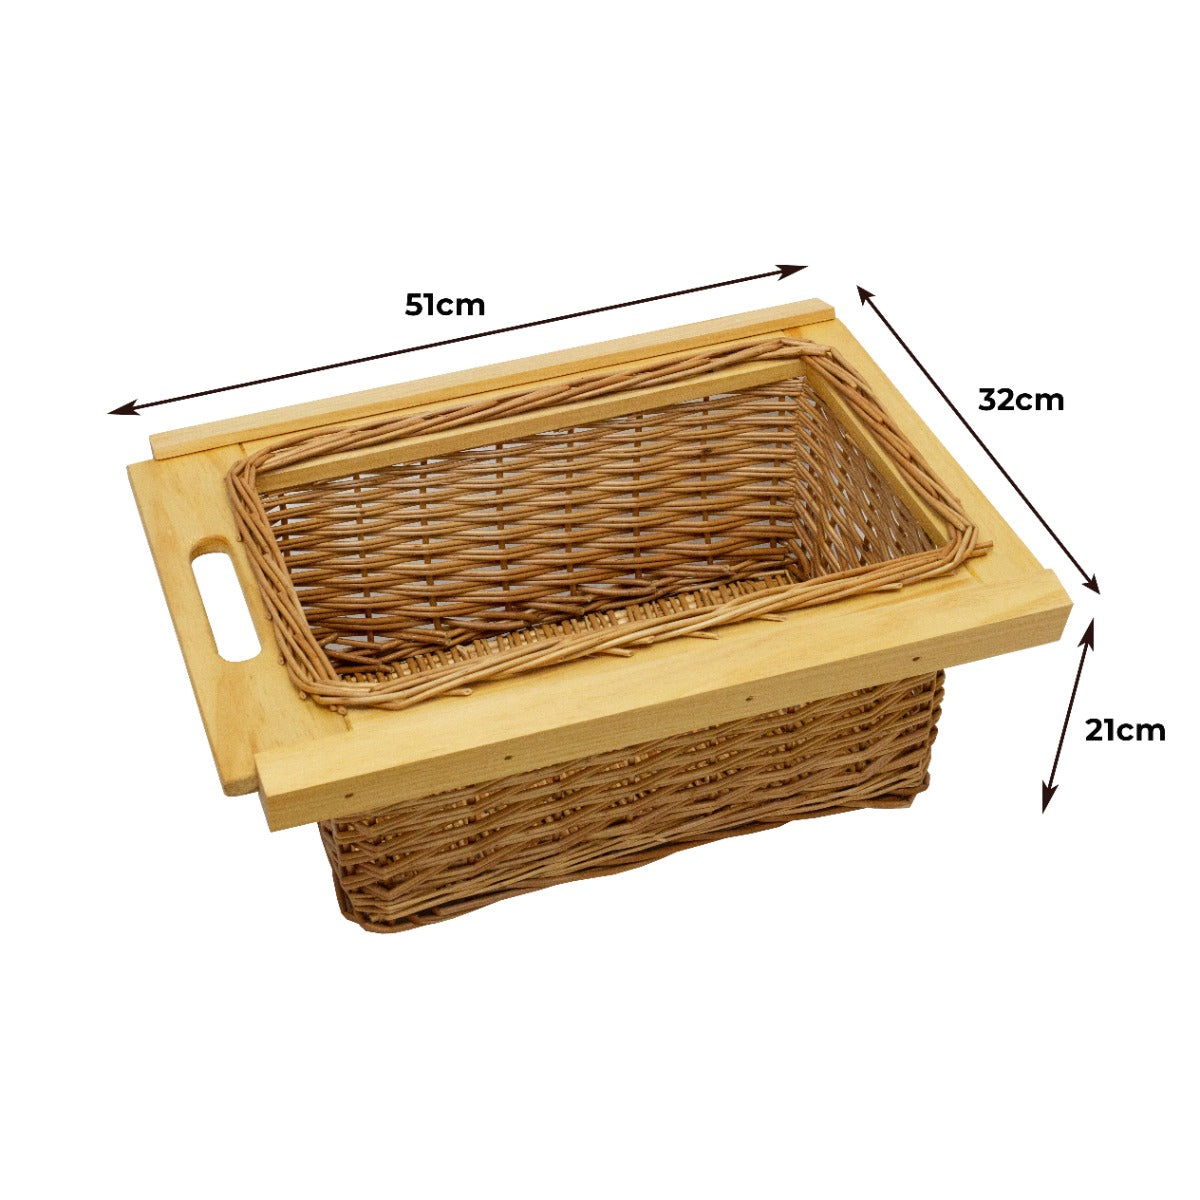 2 x Pull Out Wicker Kitchen Baskets 400mm